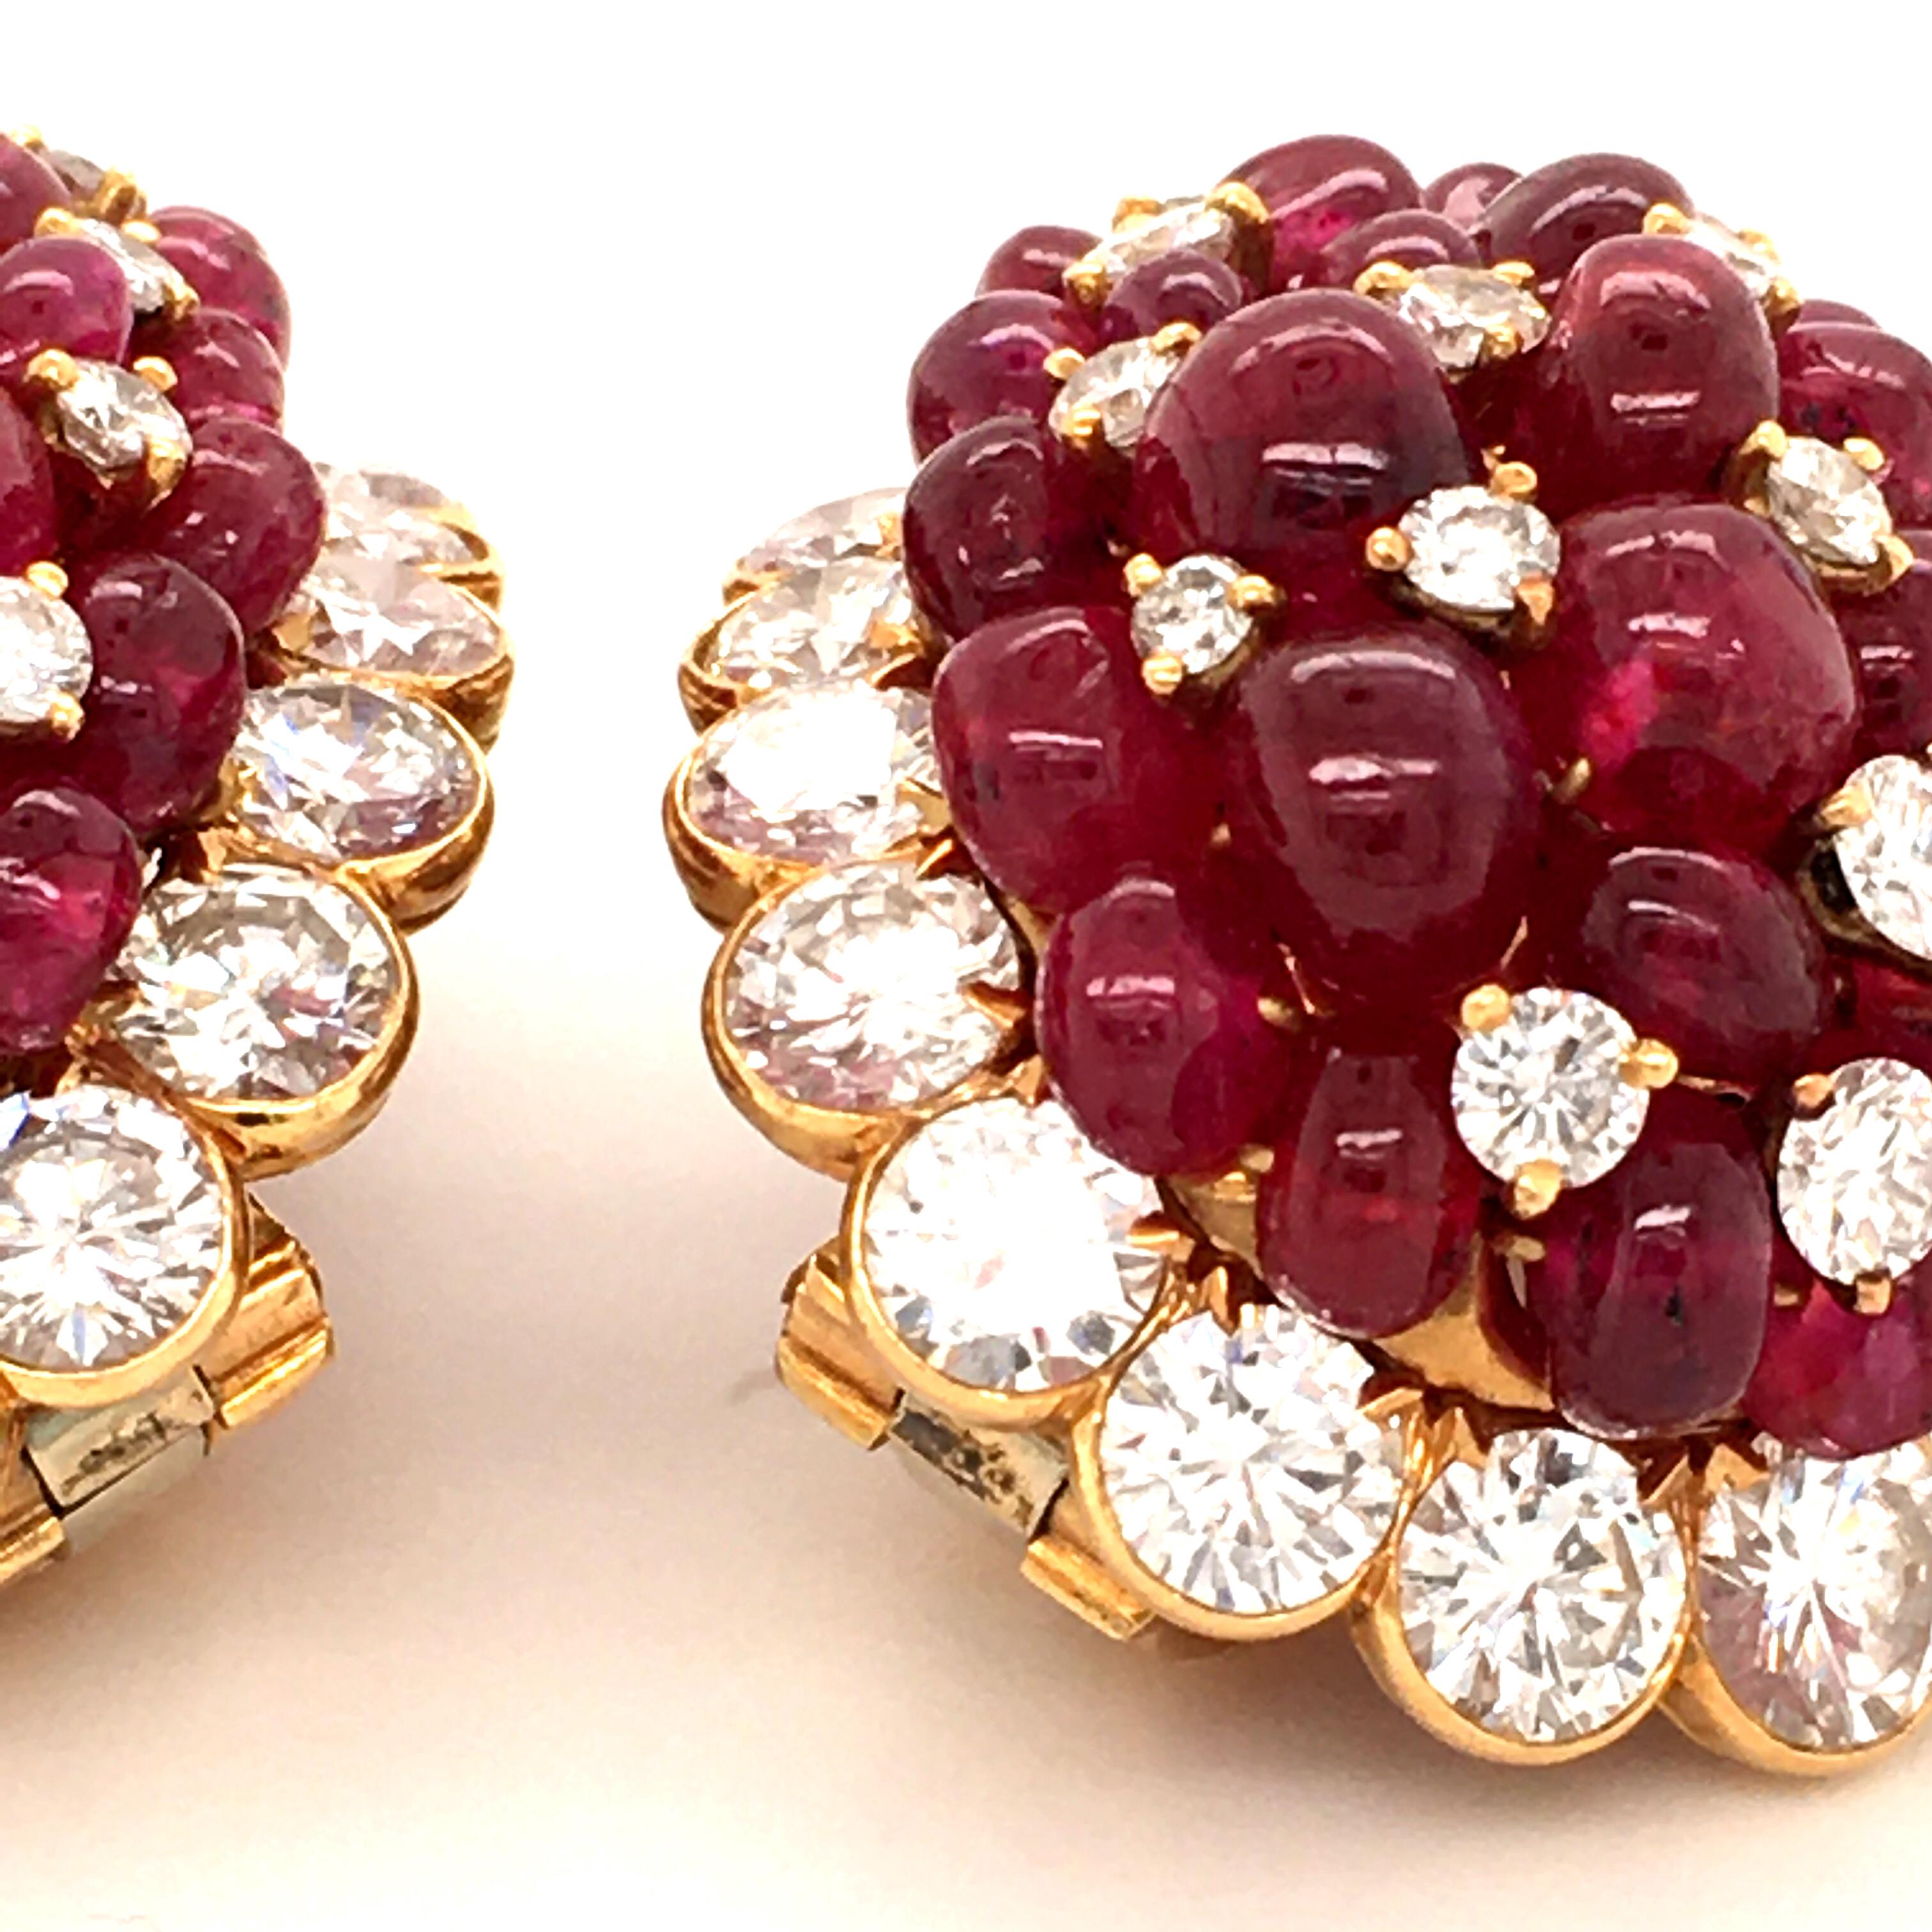 Van Cleef & Arpels Ruby and Diamond Ear Clips in Yellow Gold 750 7